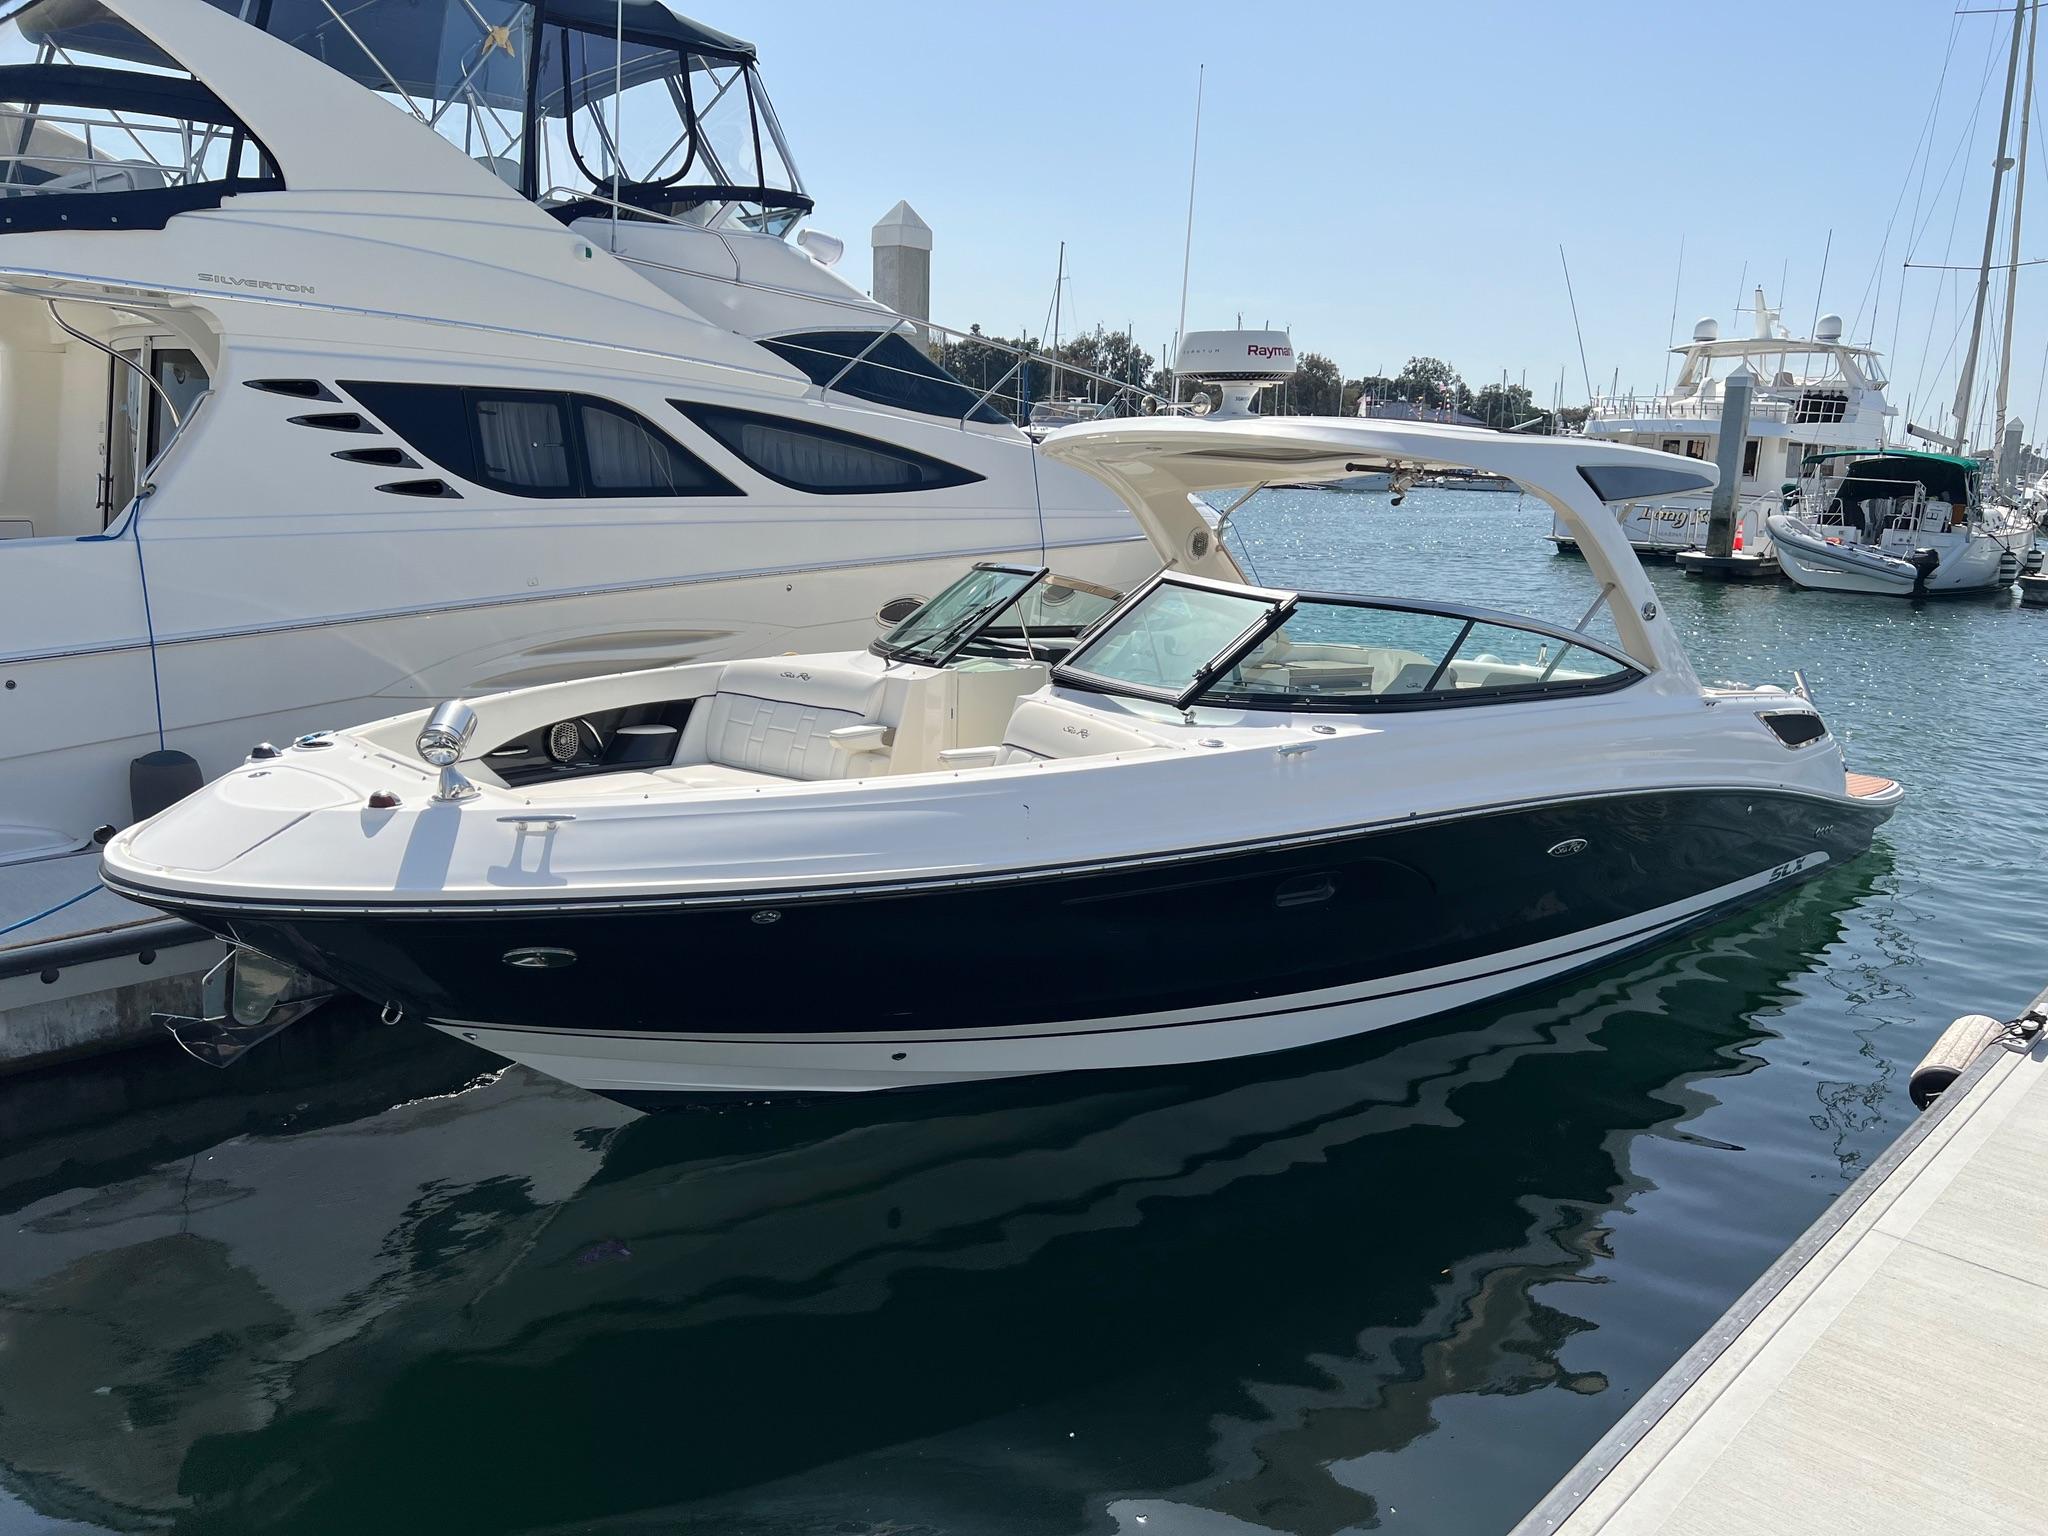 35′ Sea Ray 2015 Yacht for Sale